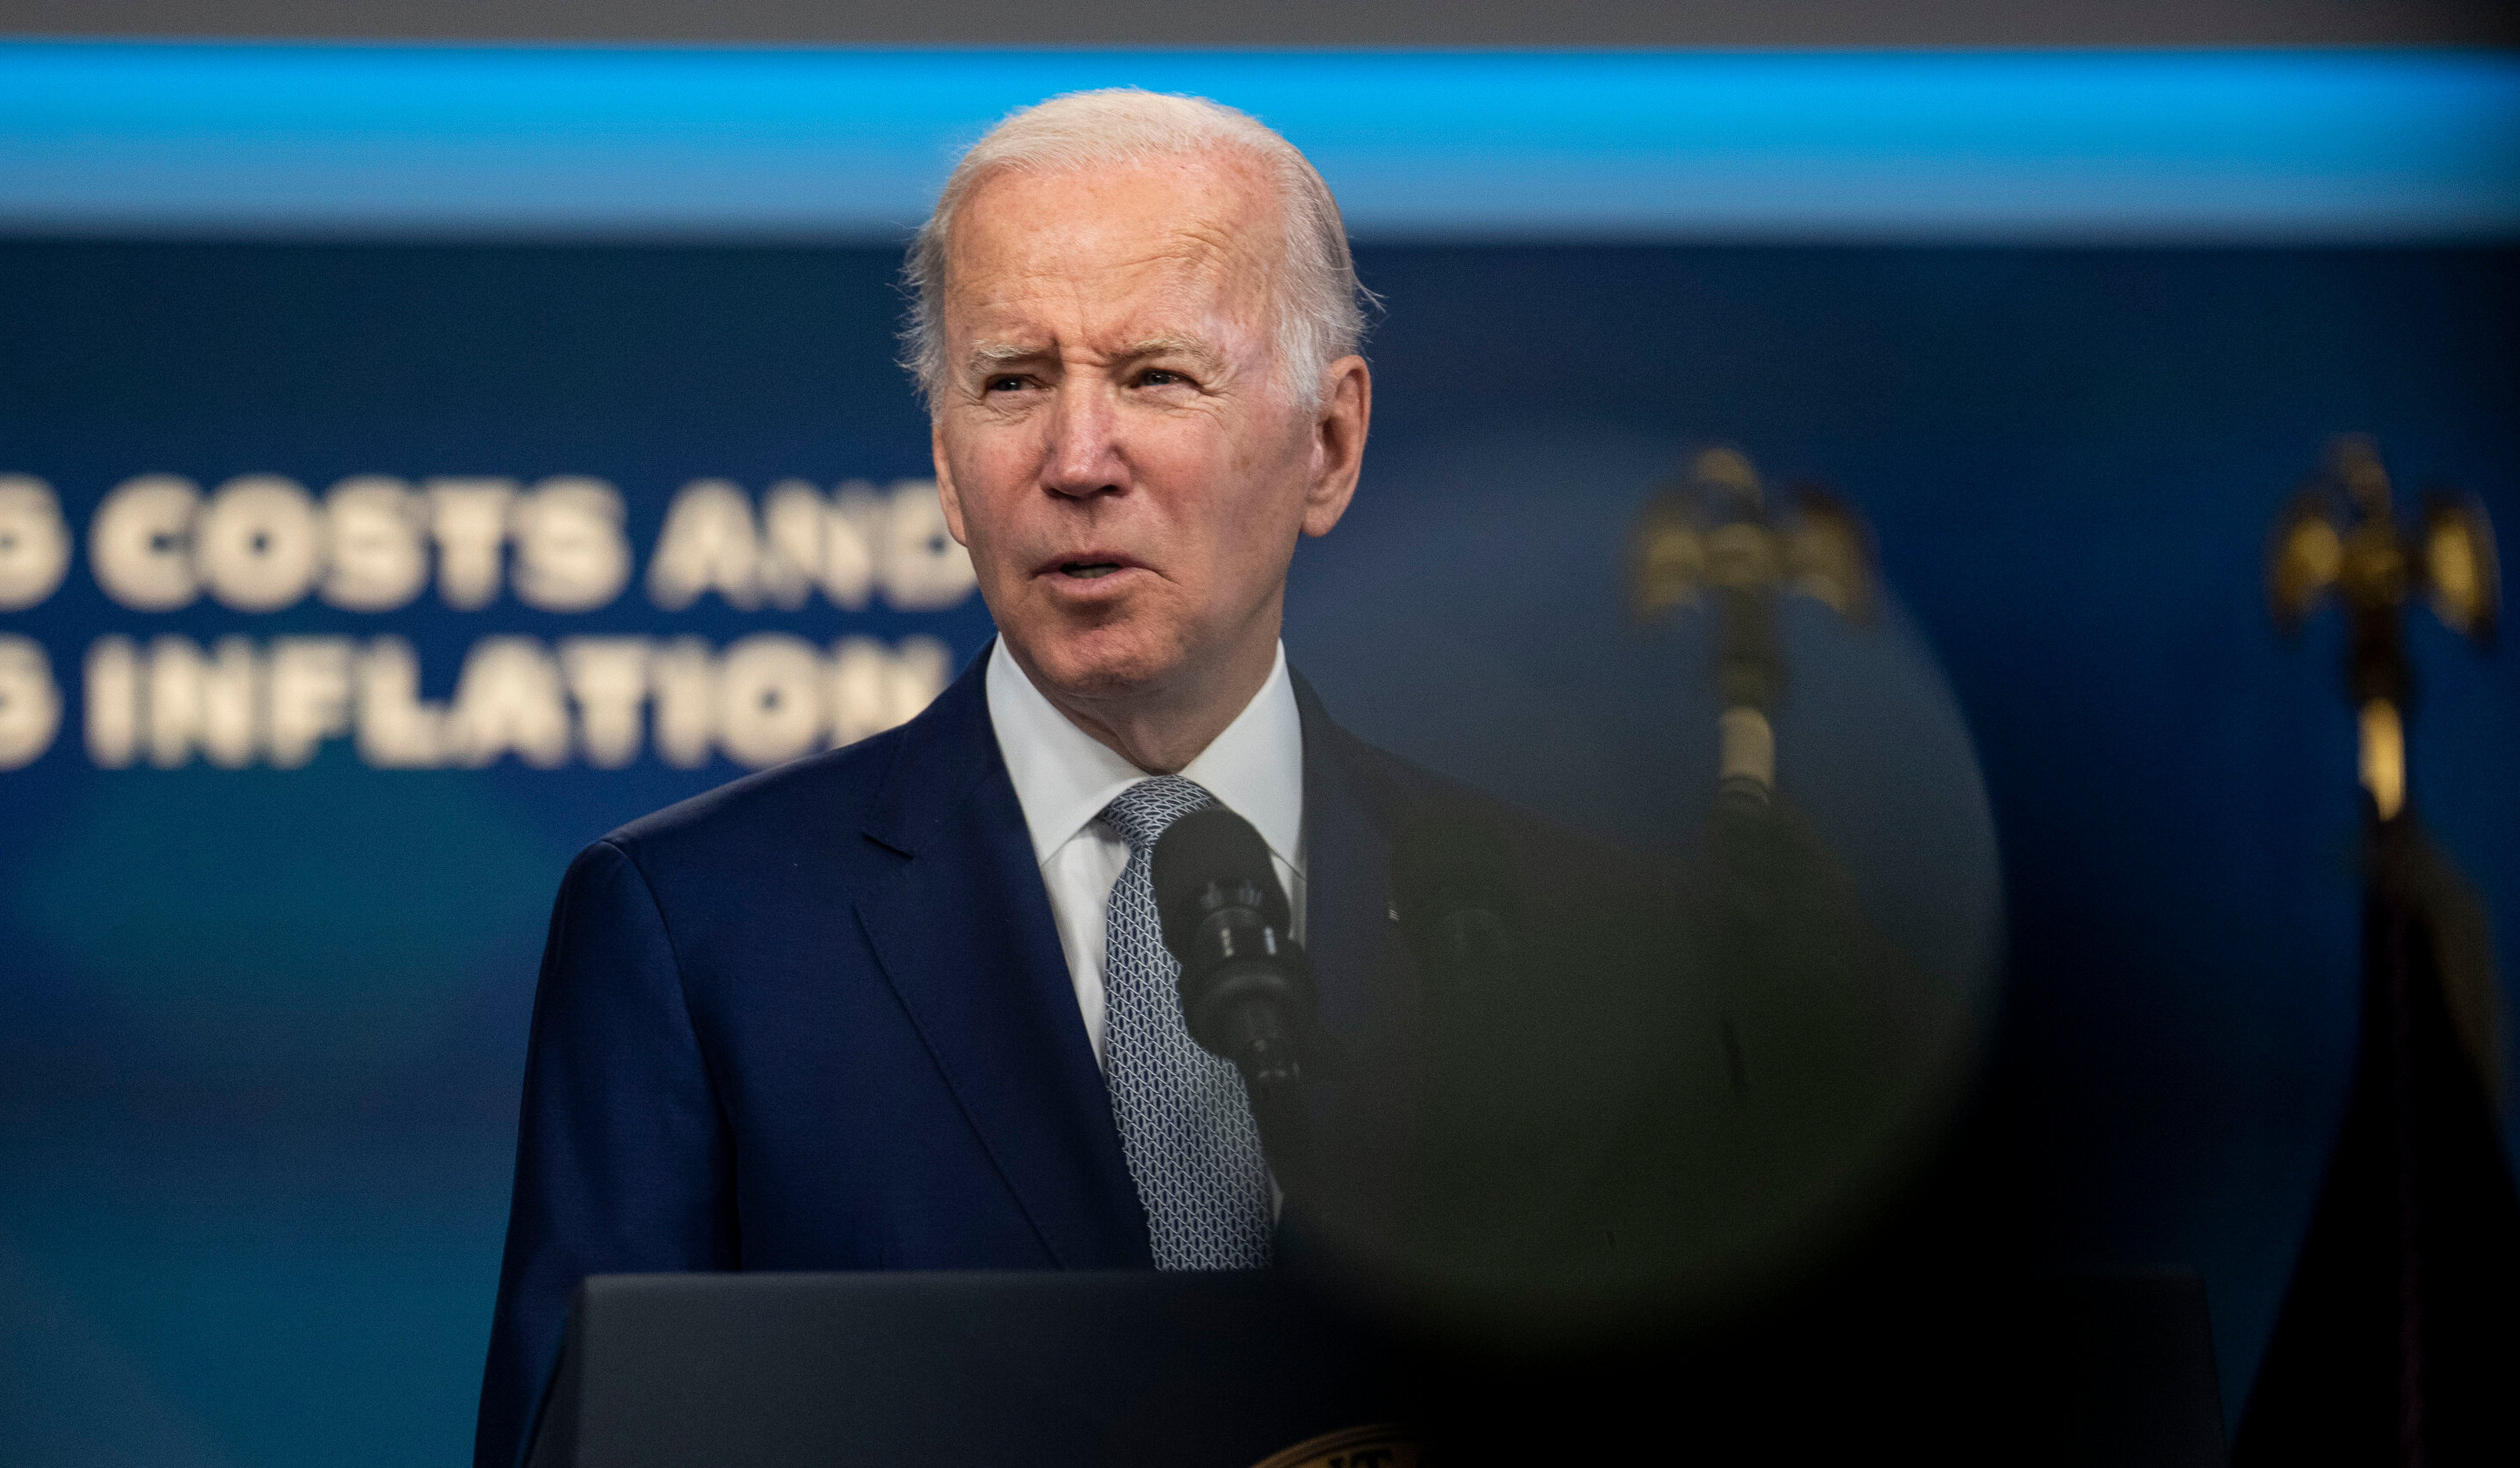 Biden to host leaders of Sweden and Finland at White House as countries look to join NATO